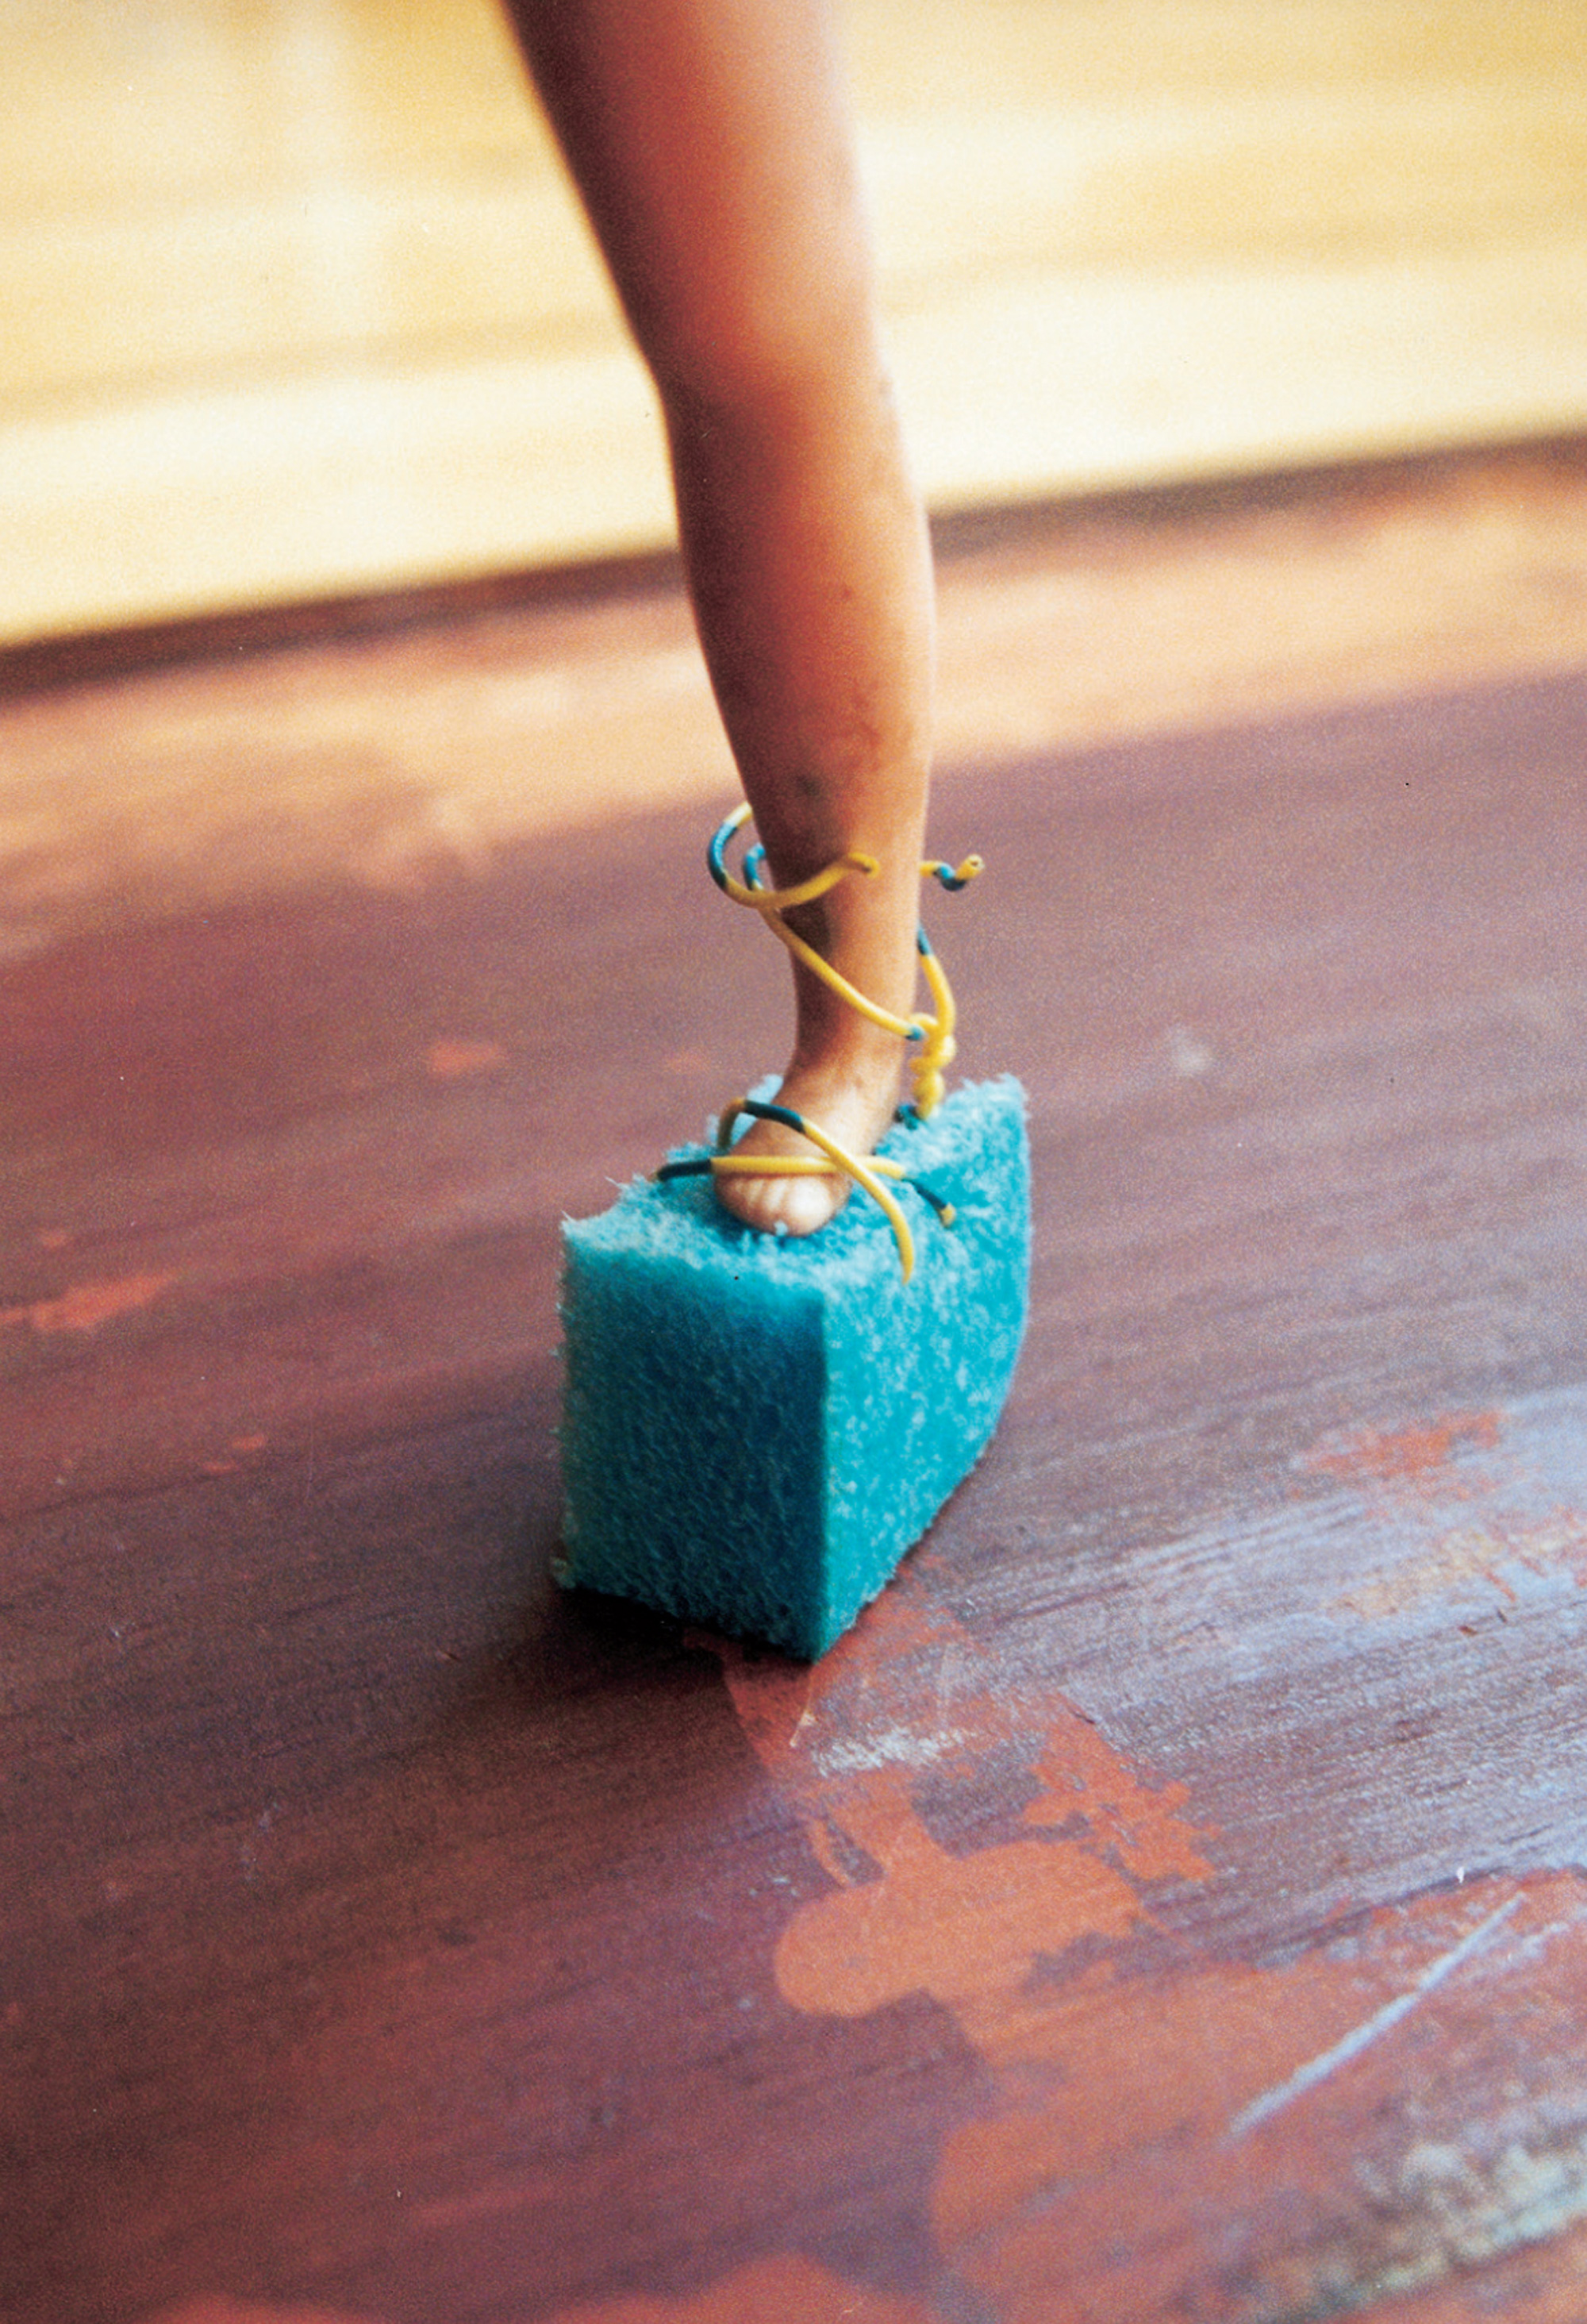 A photograph depicting a small piece of blue foam attached to a doll's foot. The caption reads: Single platform sandal of blue styrofoam with straps of yellow and blue telephone wire securing the toe with an X but loose at the ankle, up which they are possibly intended to be crisscrossed, Roman style. This artifact exemplifies the Doll Games’ strategic appropriation and ironic framing of elements of the dominant culture (in this case, popular styles of the disco era). The care put into crafting an article that would have been spurned by the Doll Games’ androgynous heroines shows the complex interplay of desire and scorn in the Doll Games’ ongoing interrogation of femininity. Just whose foot did the cobbler have in mind? Like the bewildered prince in the fairy tale, we are left with a shoe and a question.
